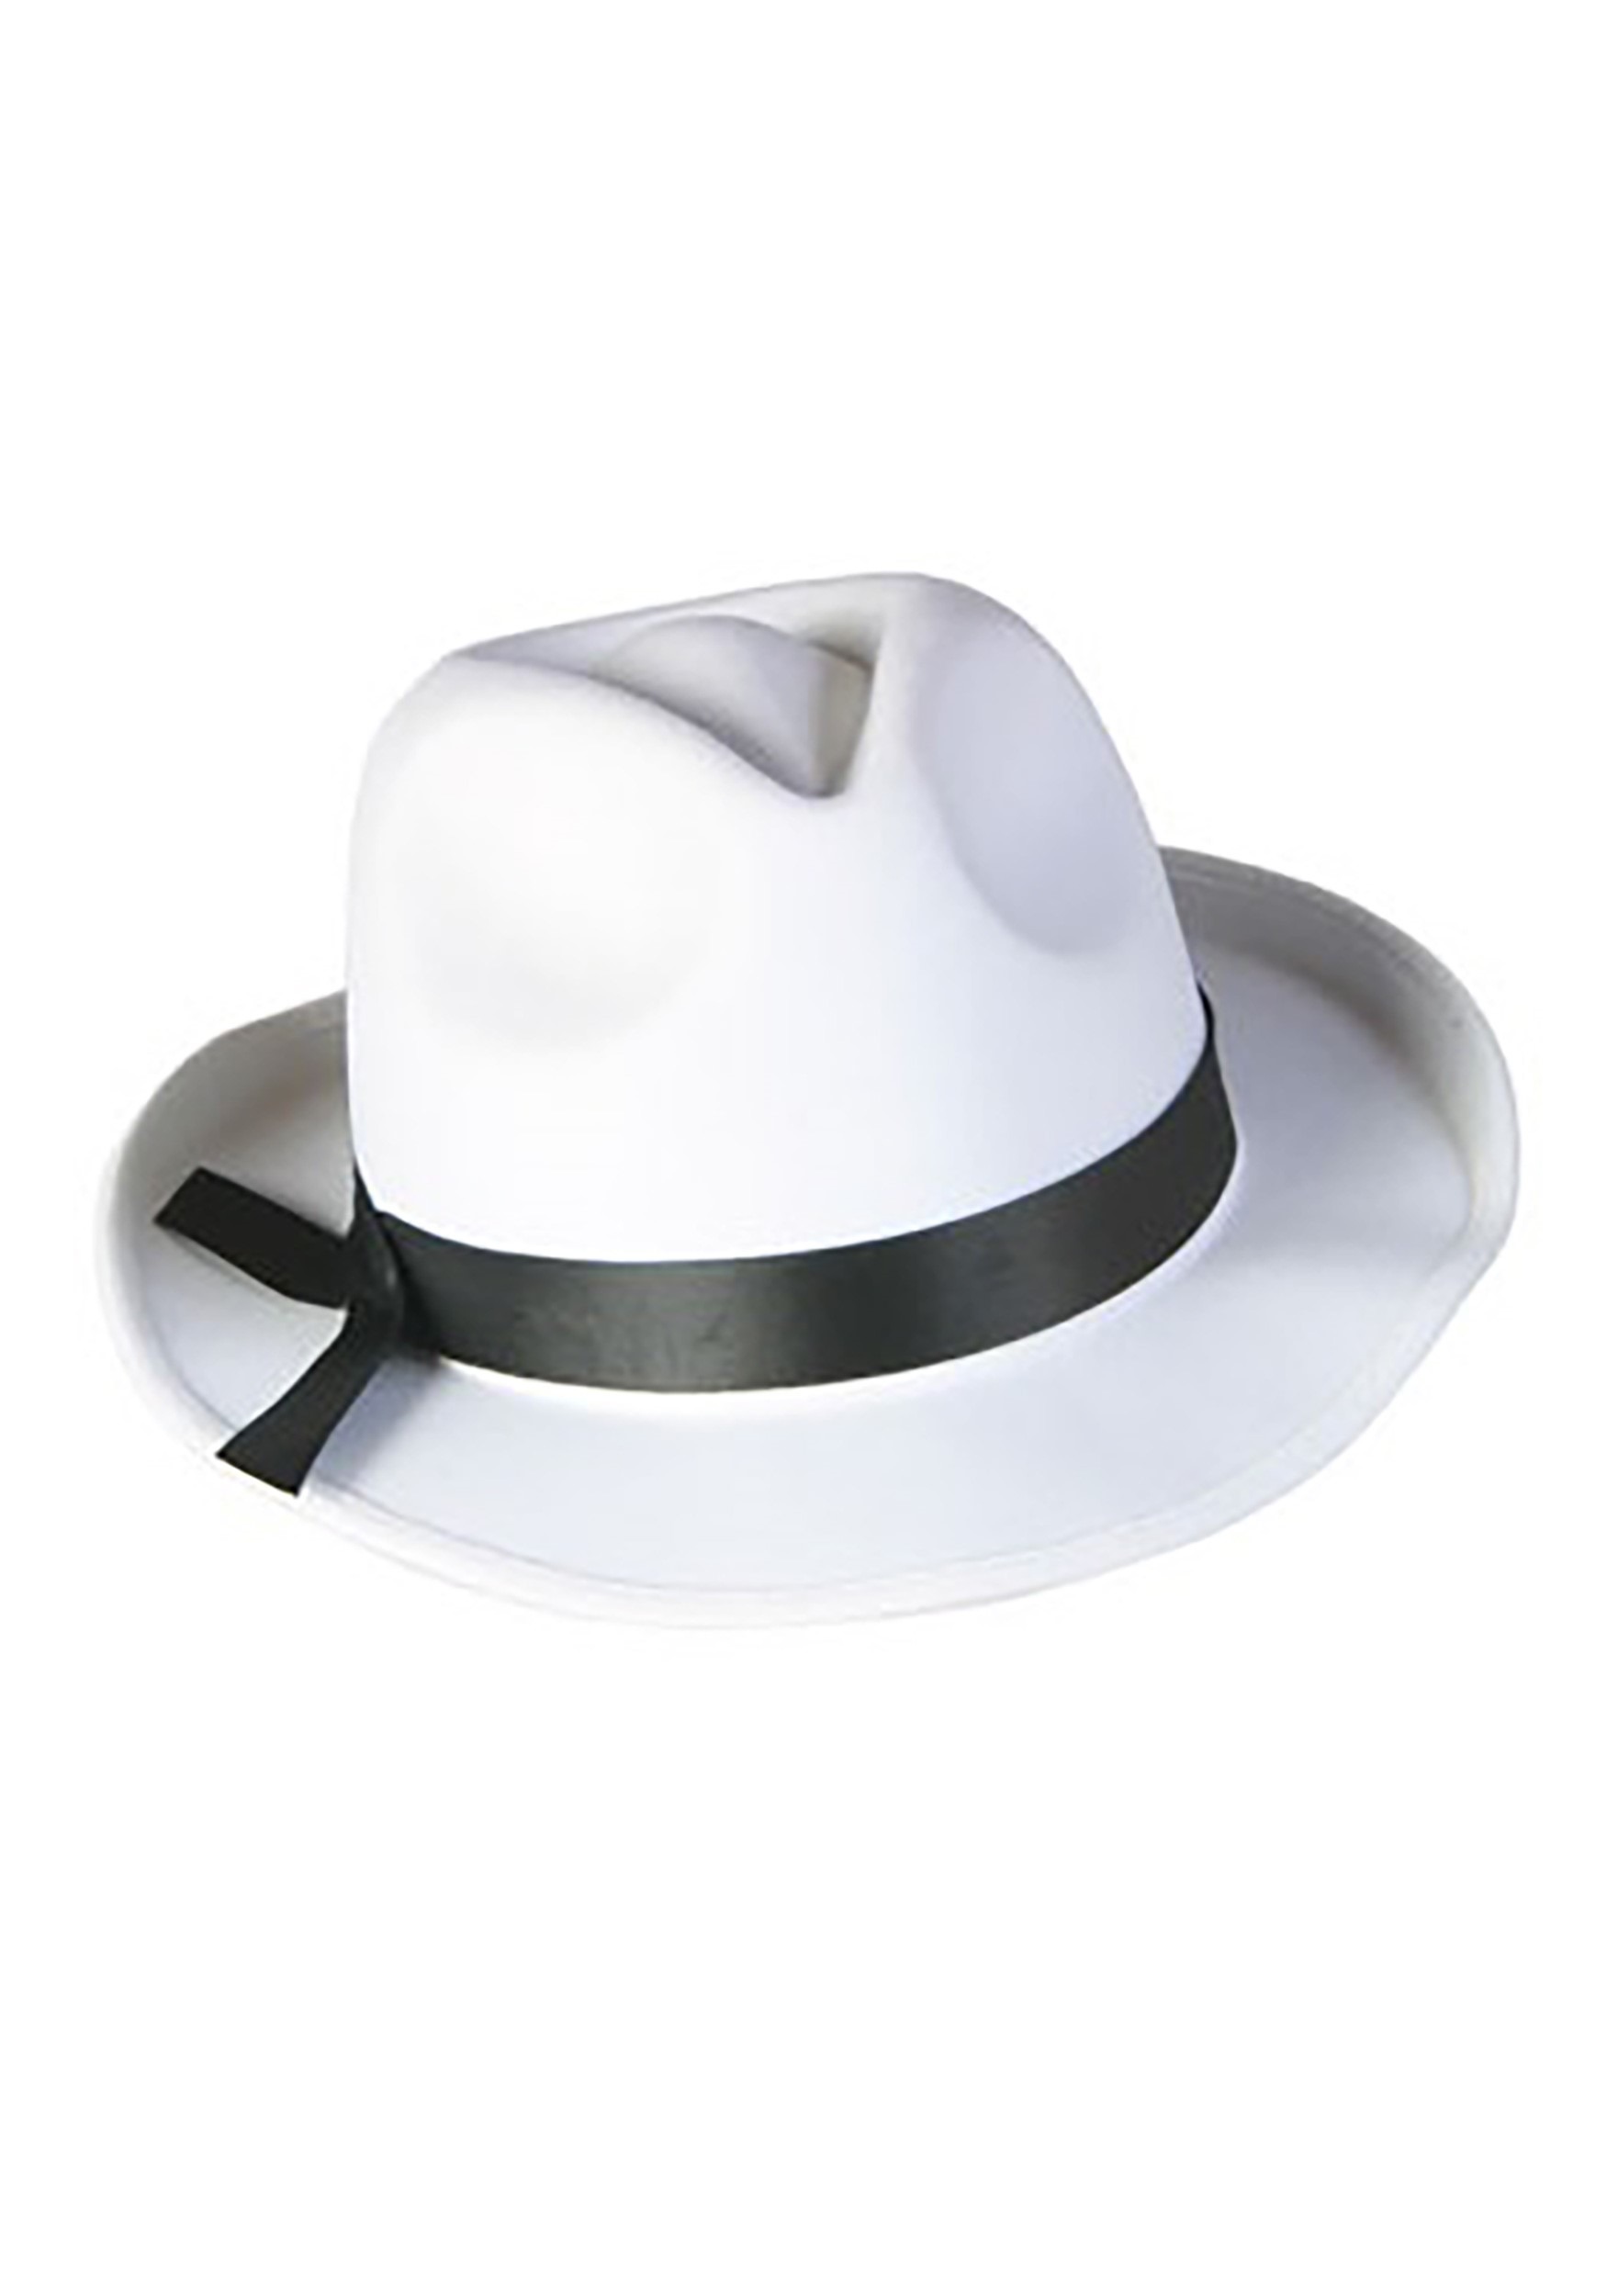 White Fedora Mobster Fancy Dress Costume Hat Accessory